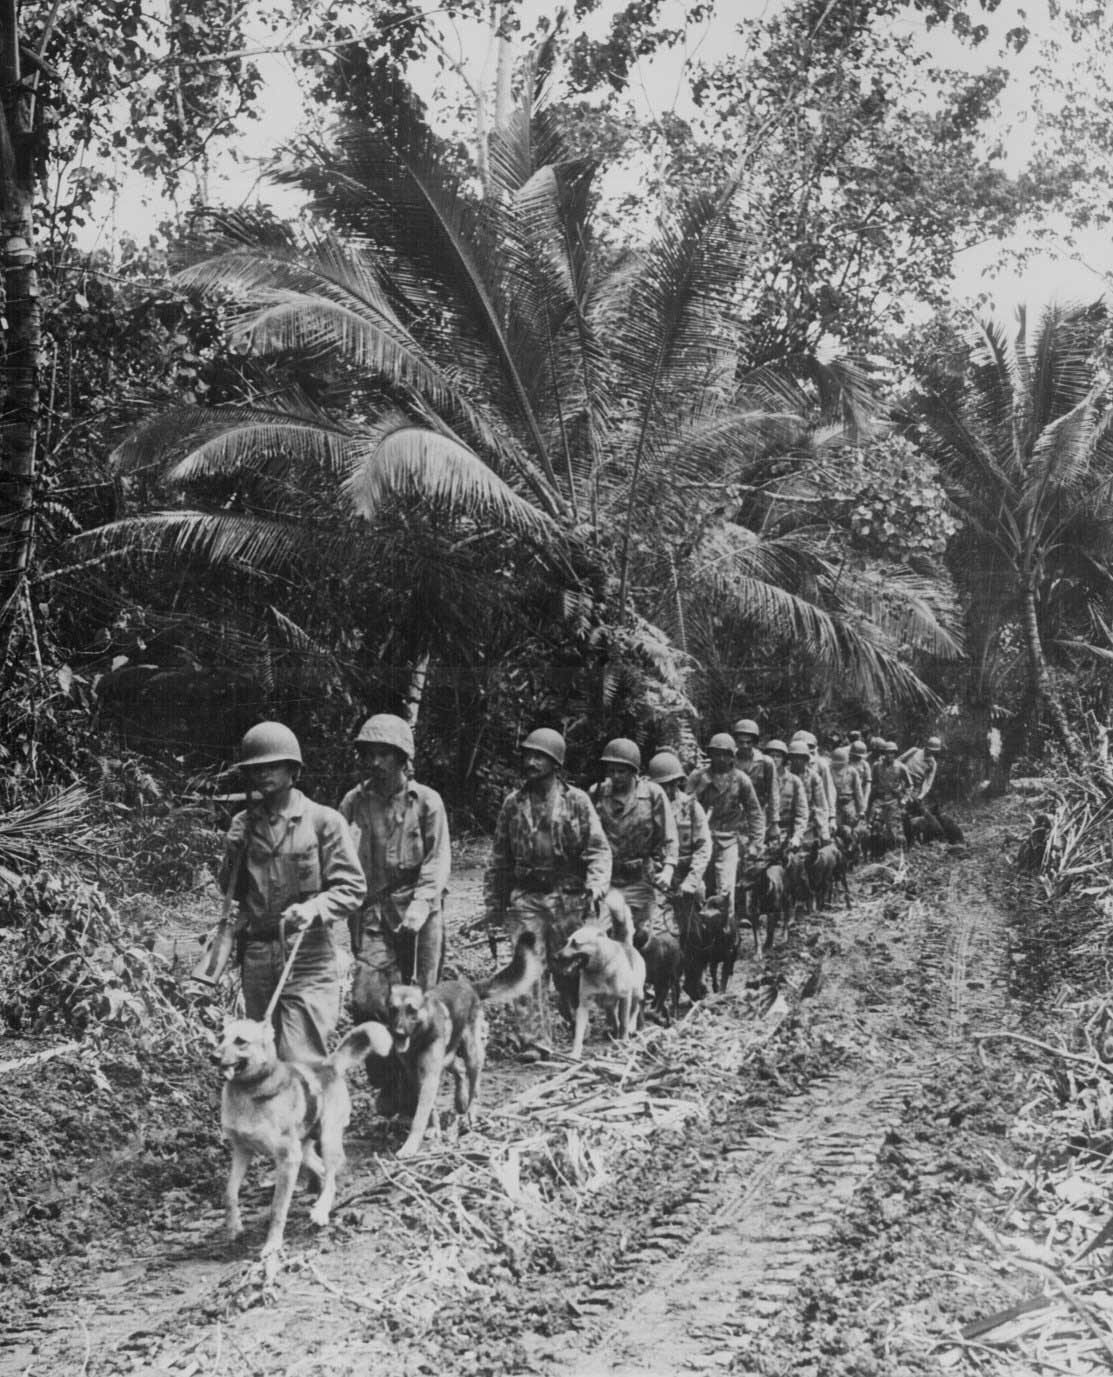 US Marine 'Raiders' and their dogs on Bougainville, circa Nov-Dec 1943